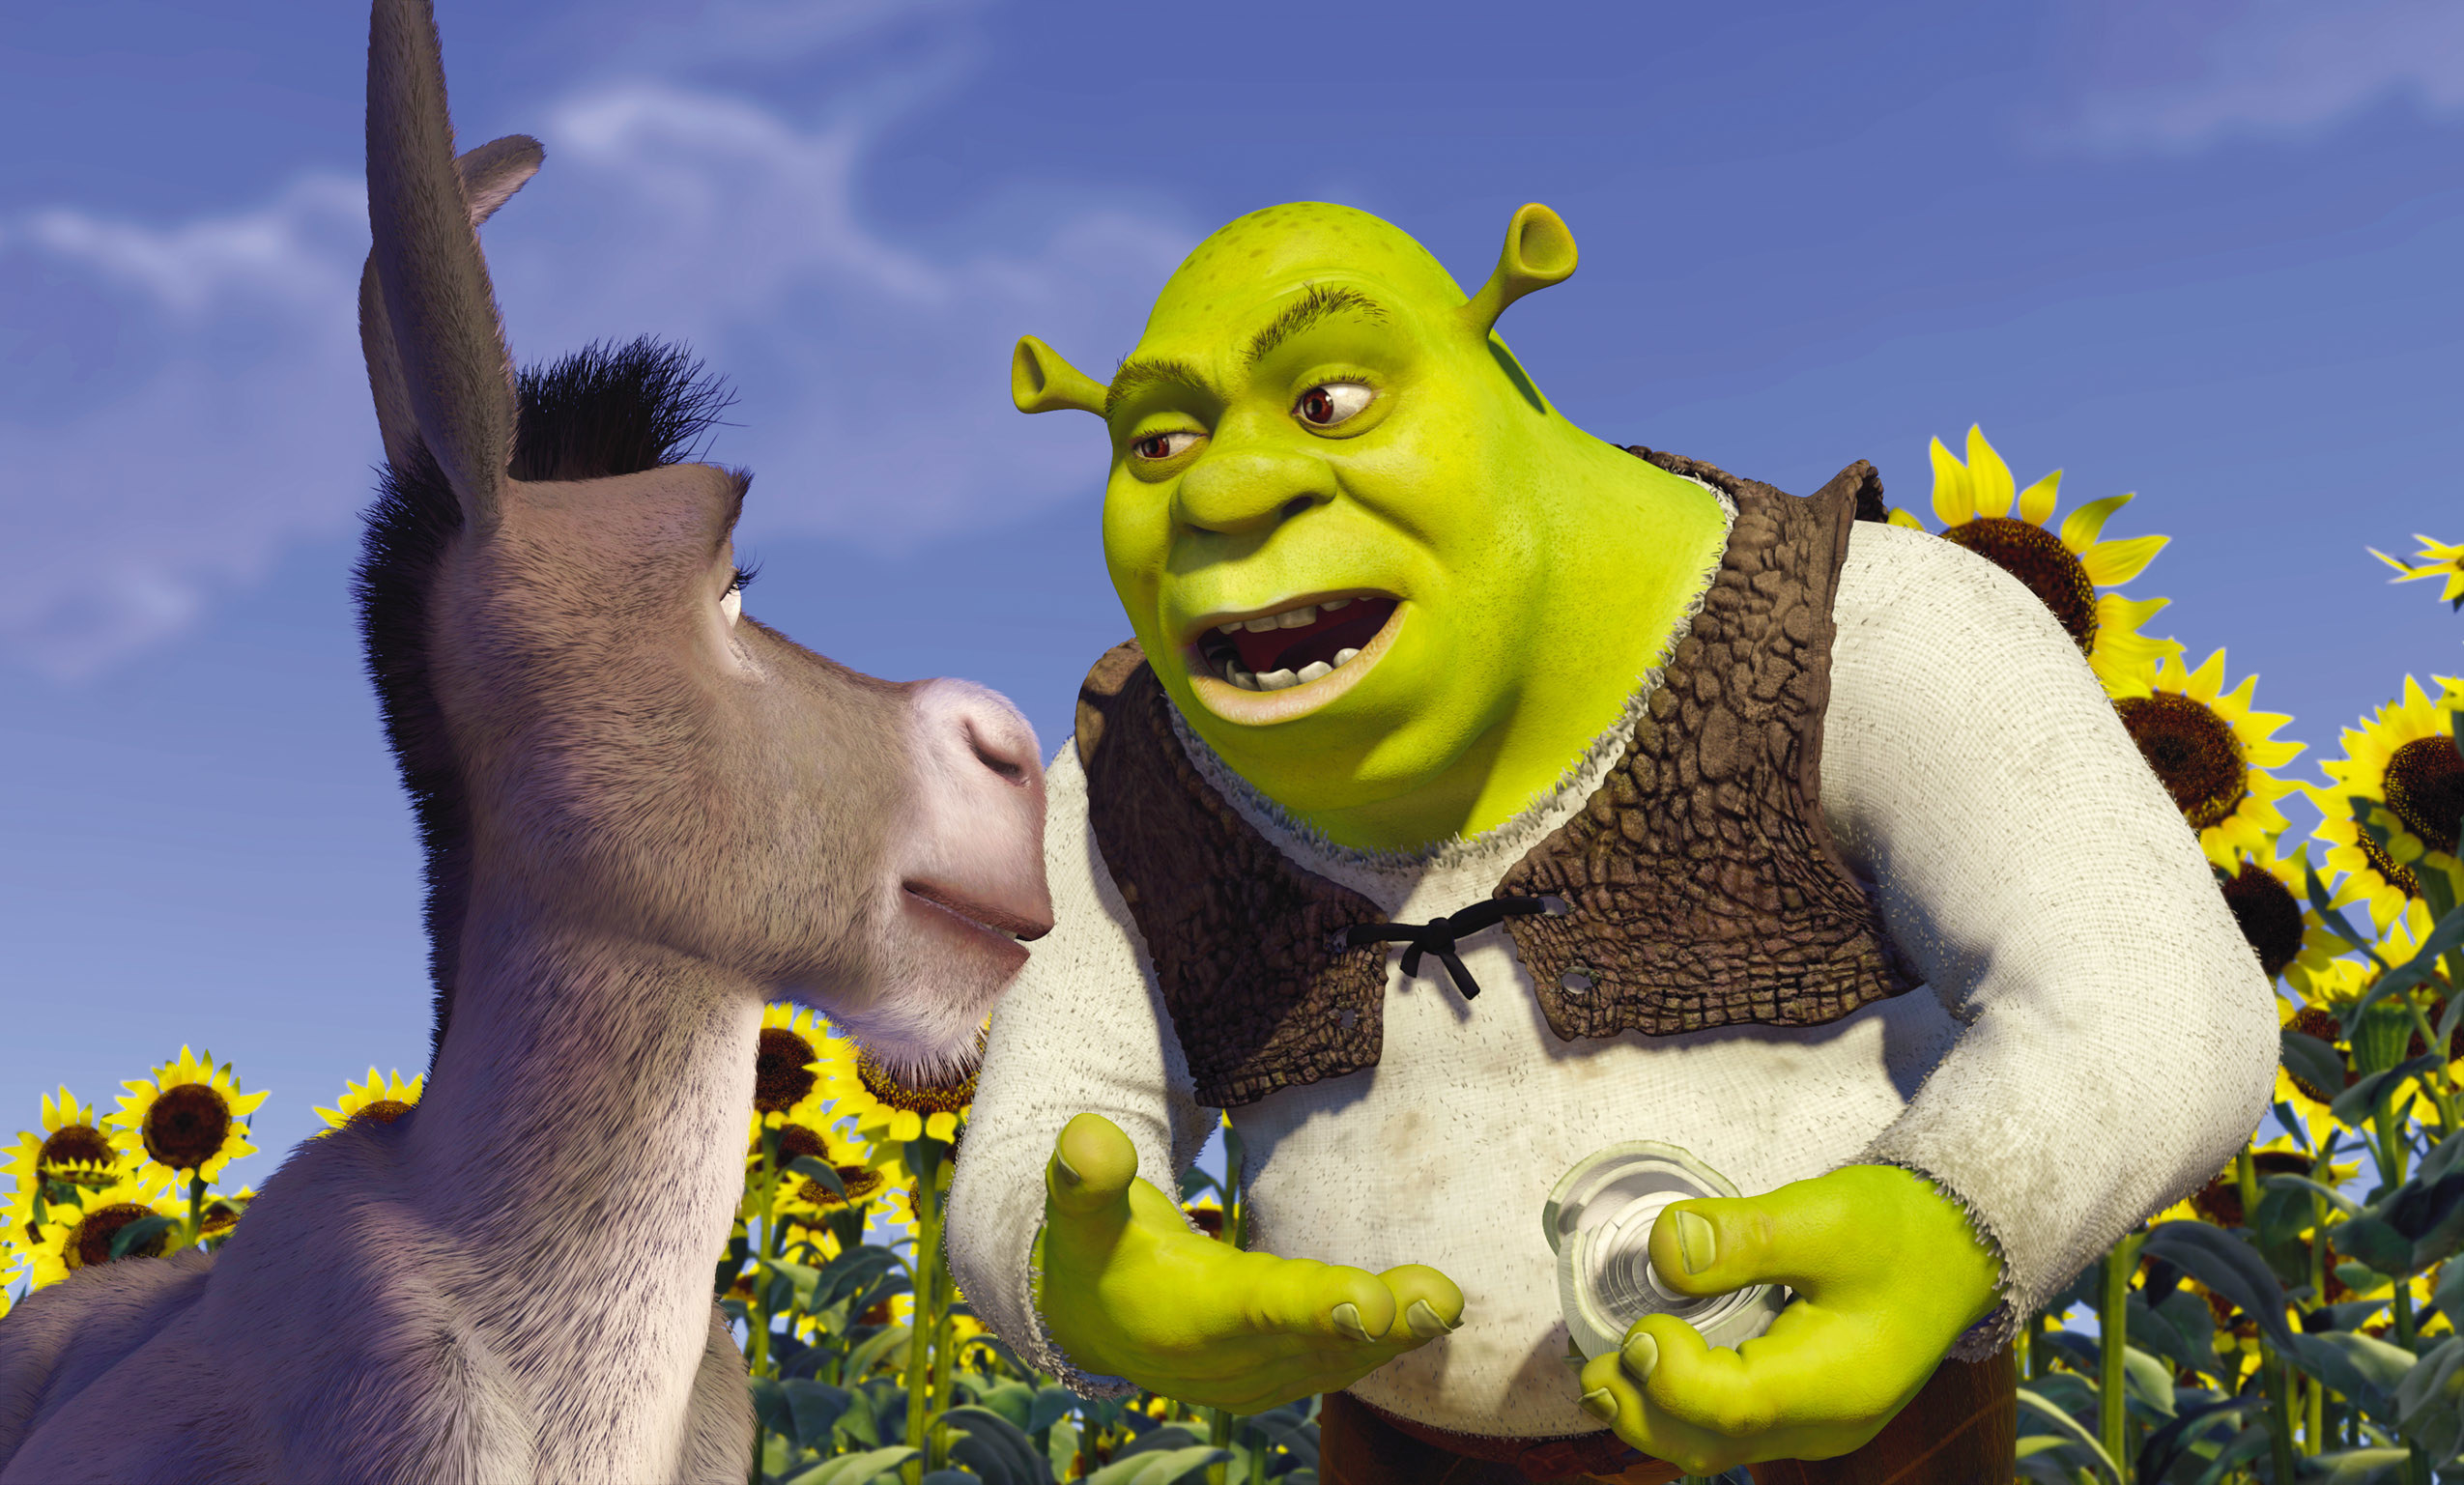 Animation: Shrek and the Donkey stand in a sunflower field.